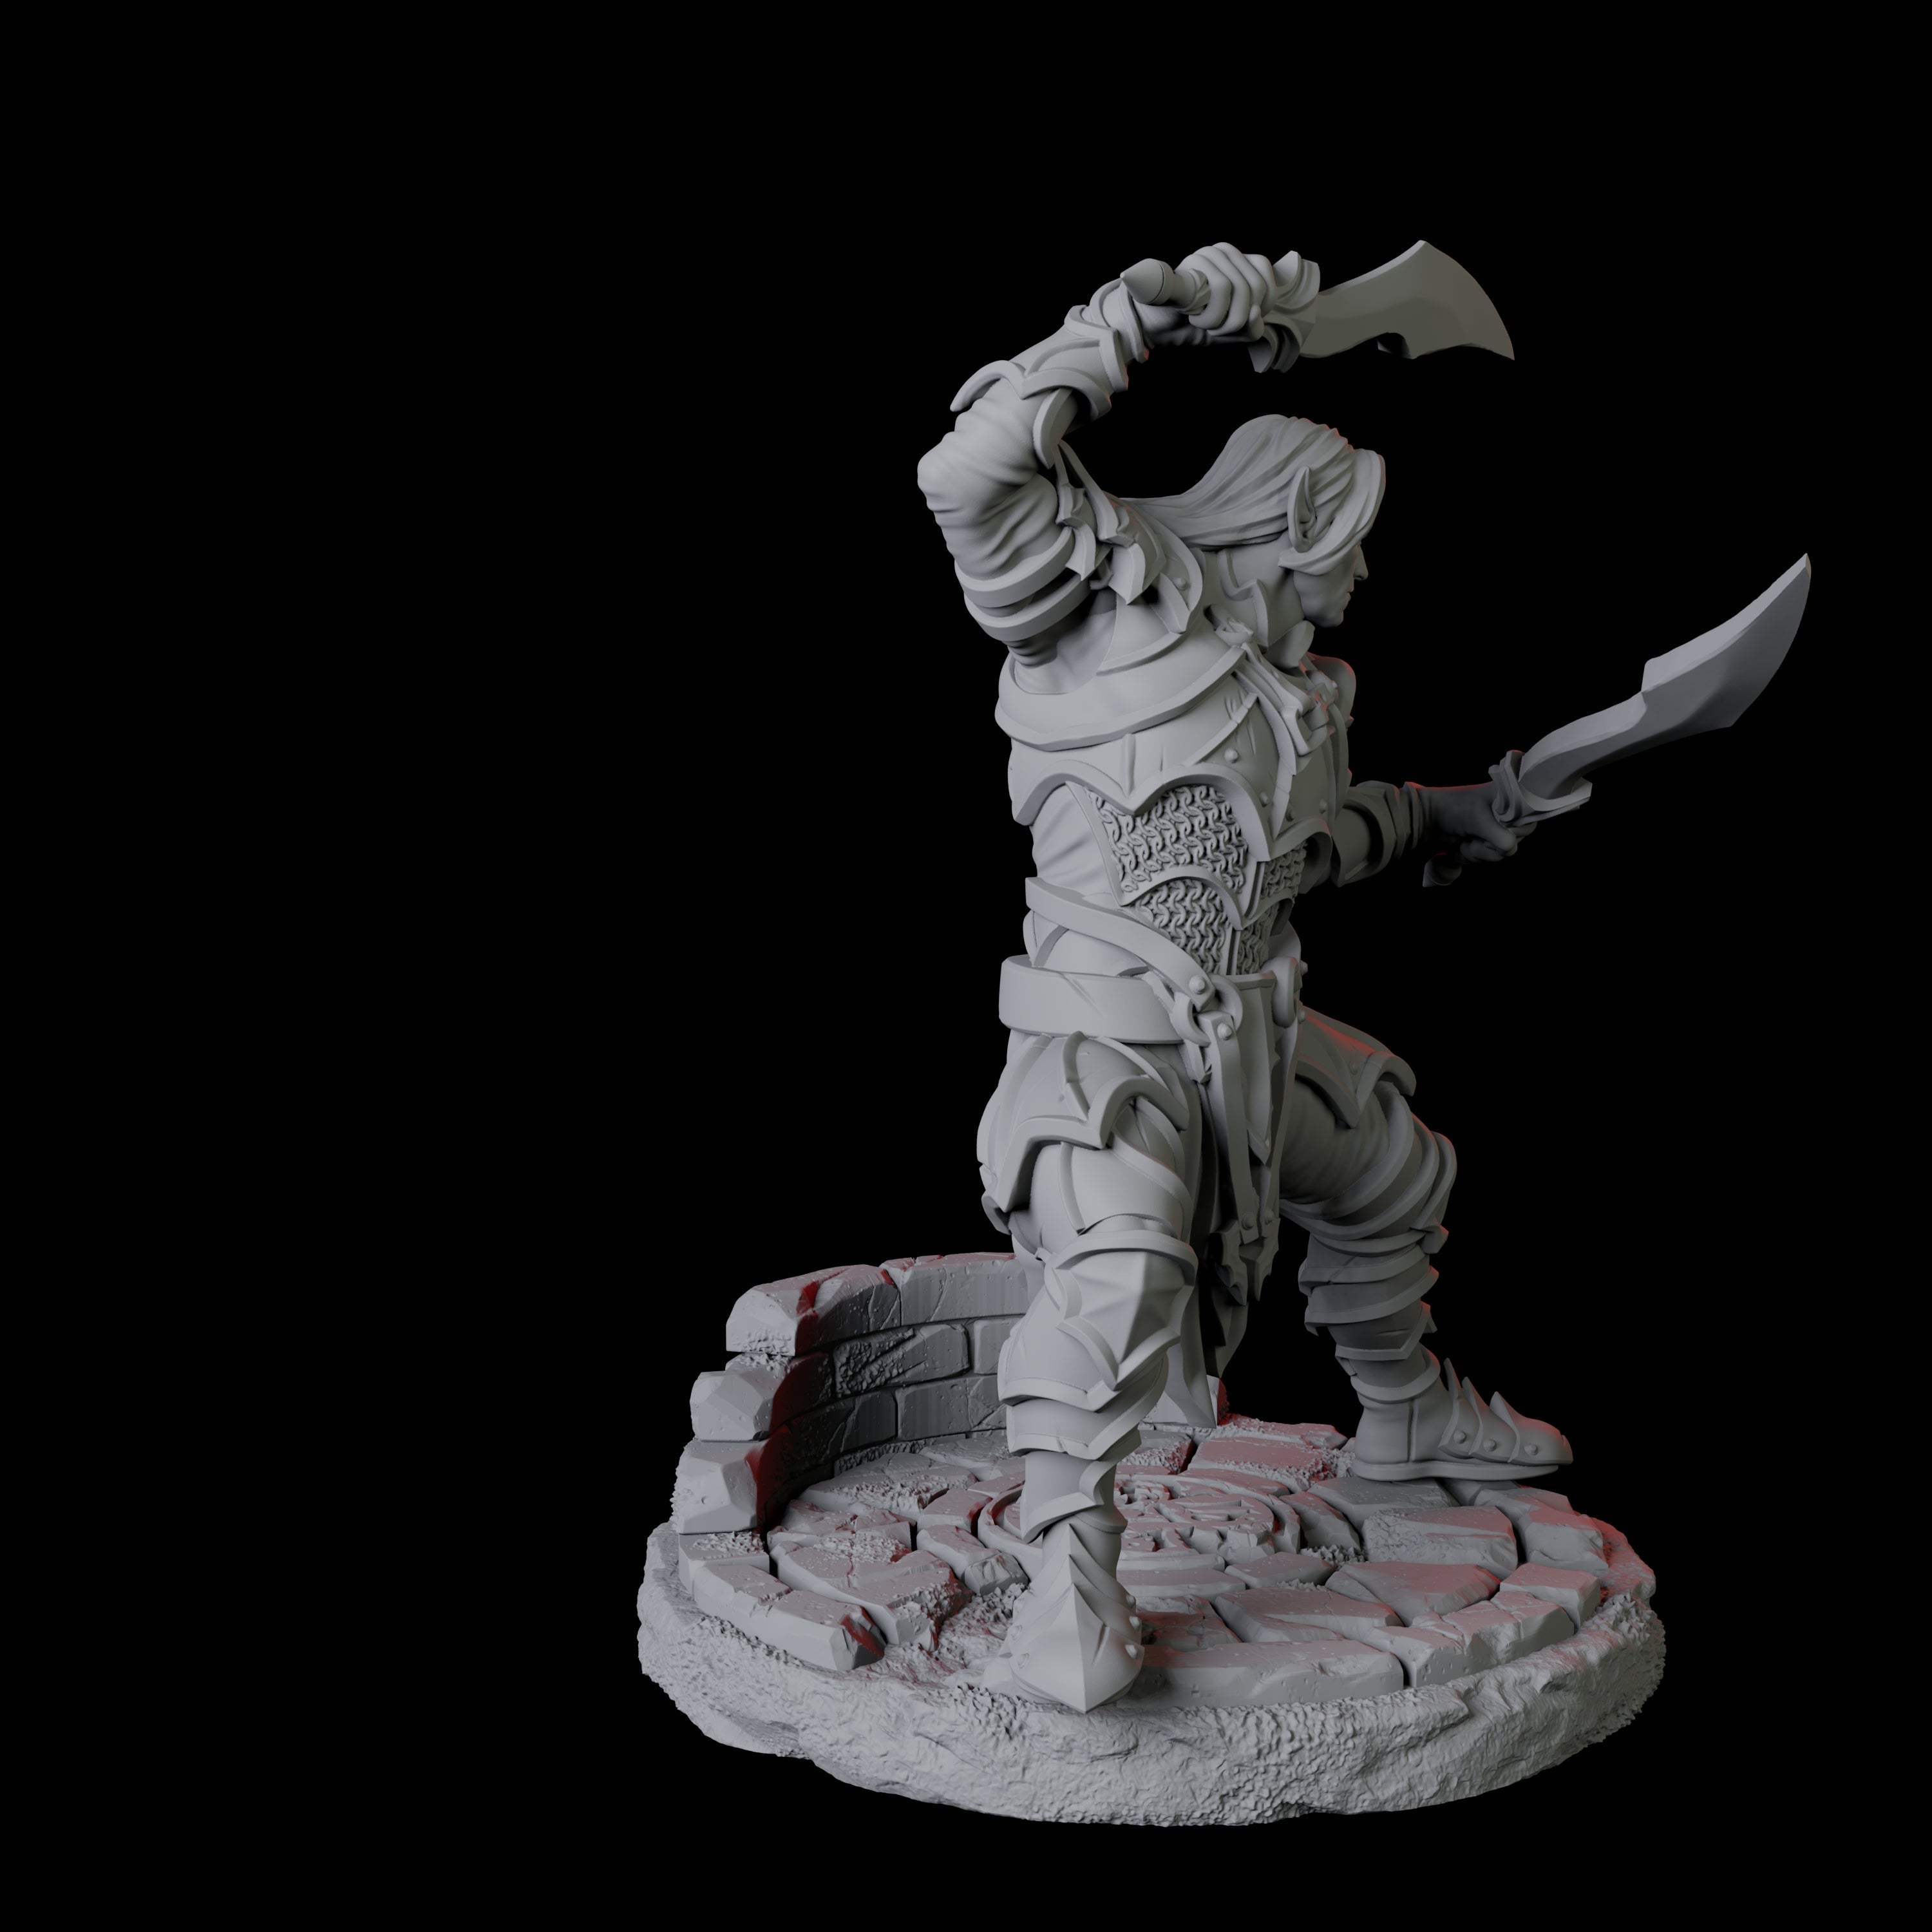 Two Dual Wielding Swordsman B Miniature for Dungeons and Dragons, Pathfinder or other TTRPGs